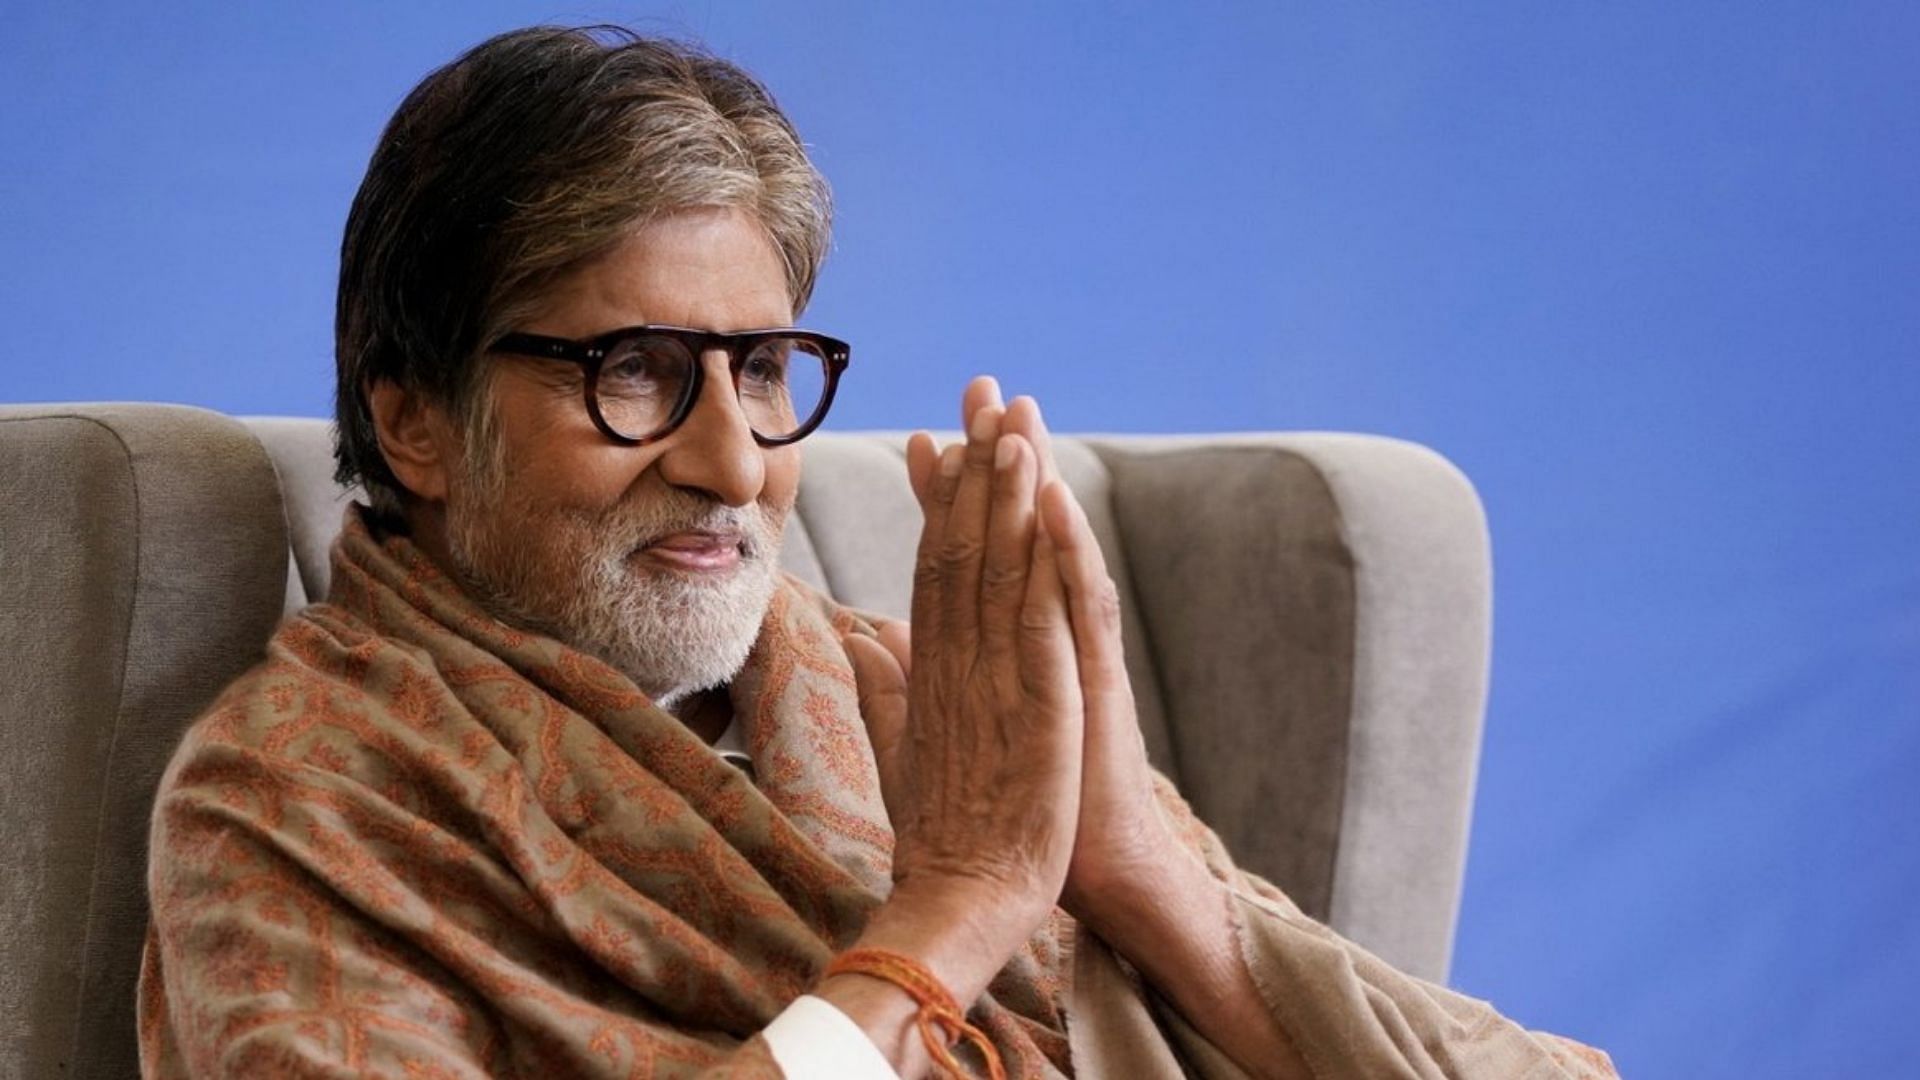 Amitabh Bachchan has cleared the loans of several farmers as part of his charity efforts.